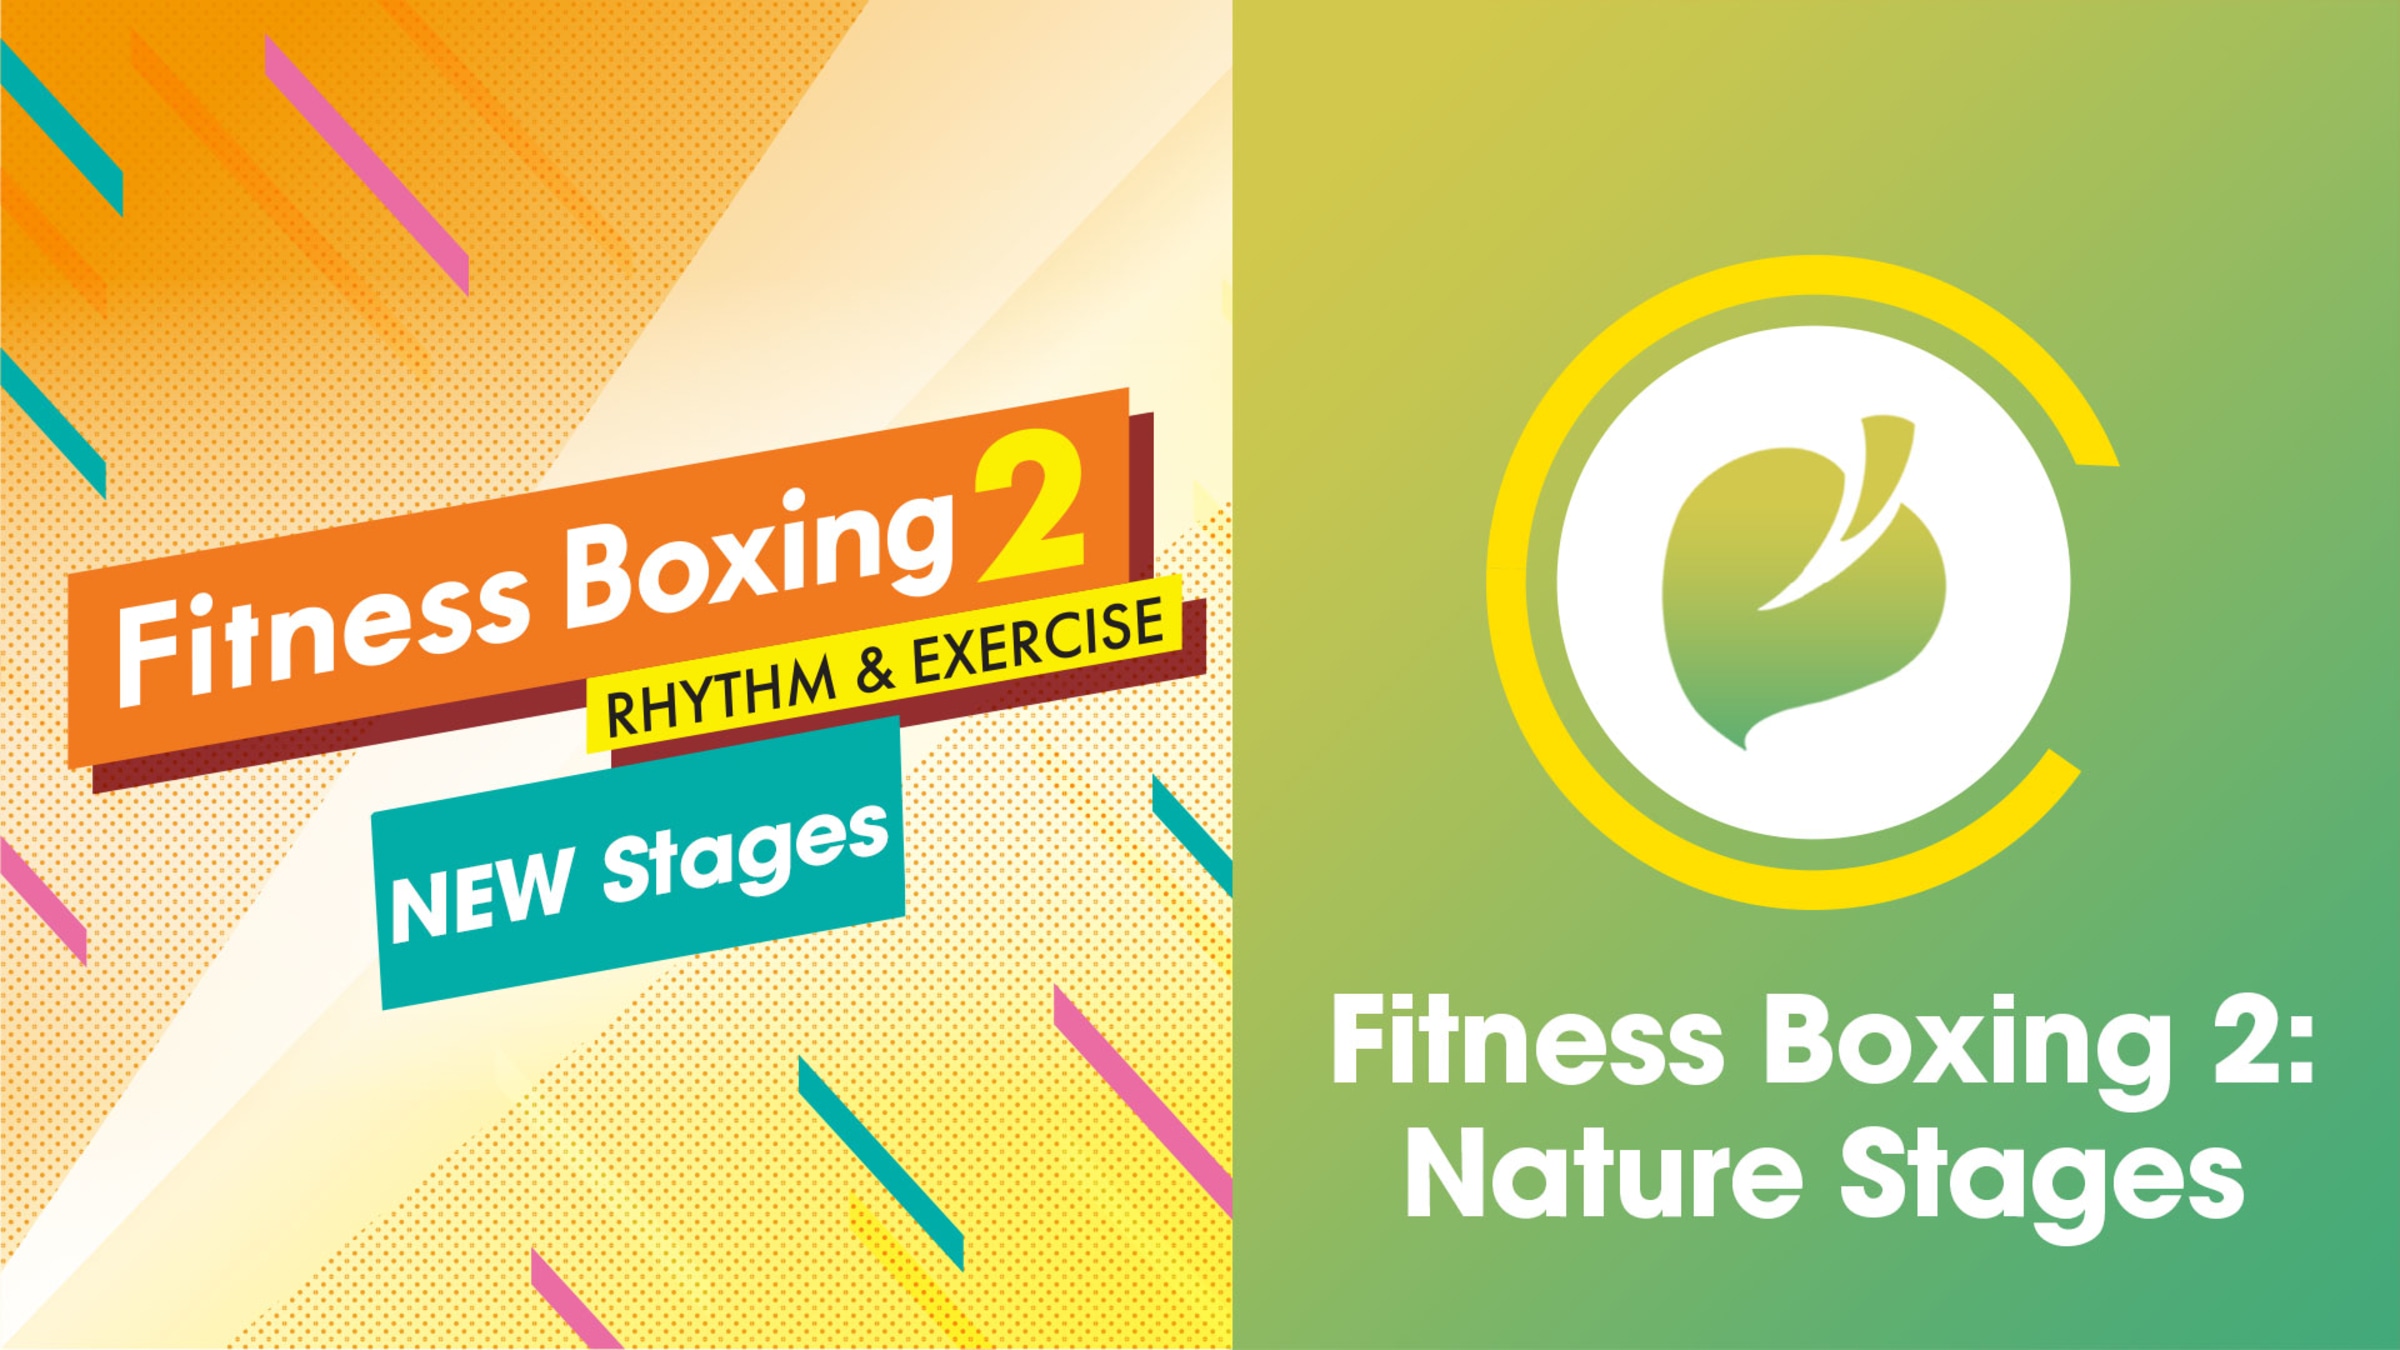 - Fitness Boxing Nintendo Nintendo Switch Nature Official Stages 2: Site for